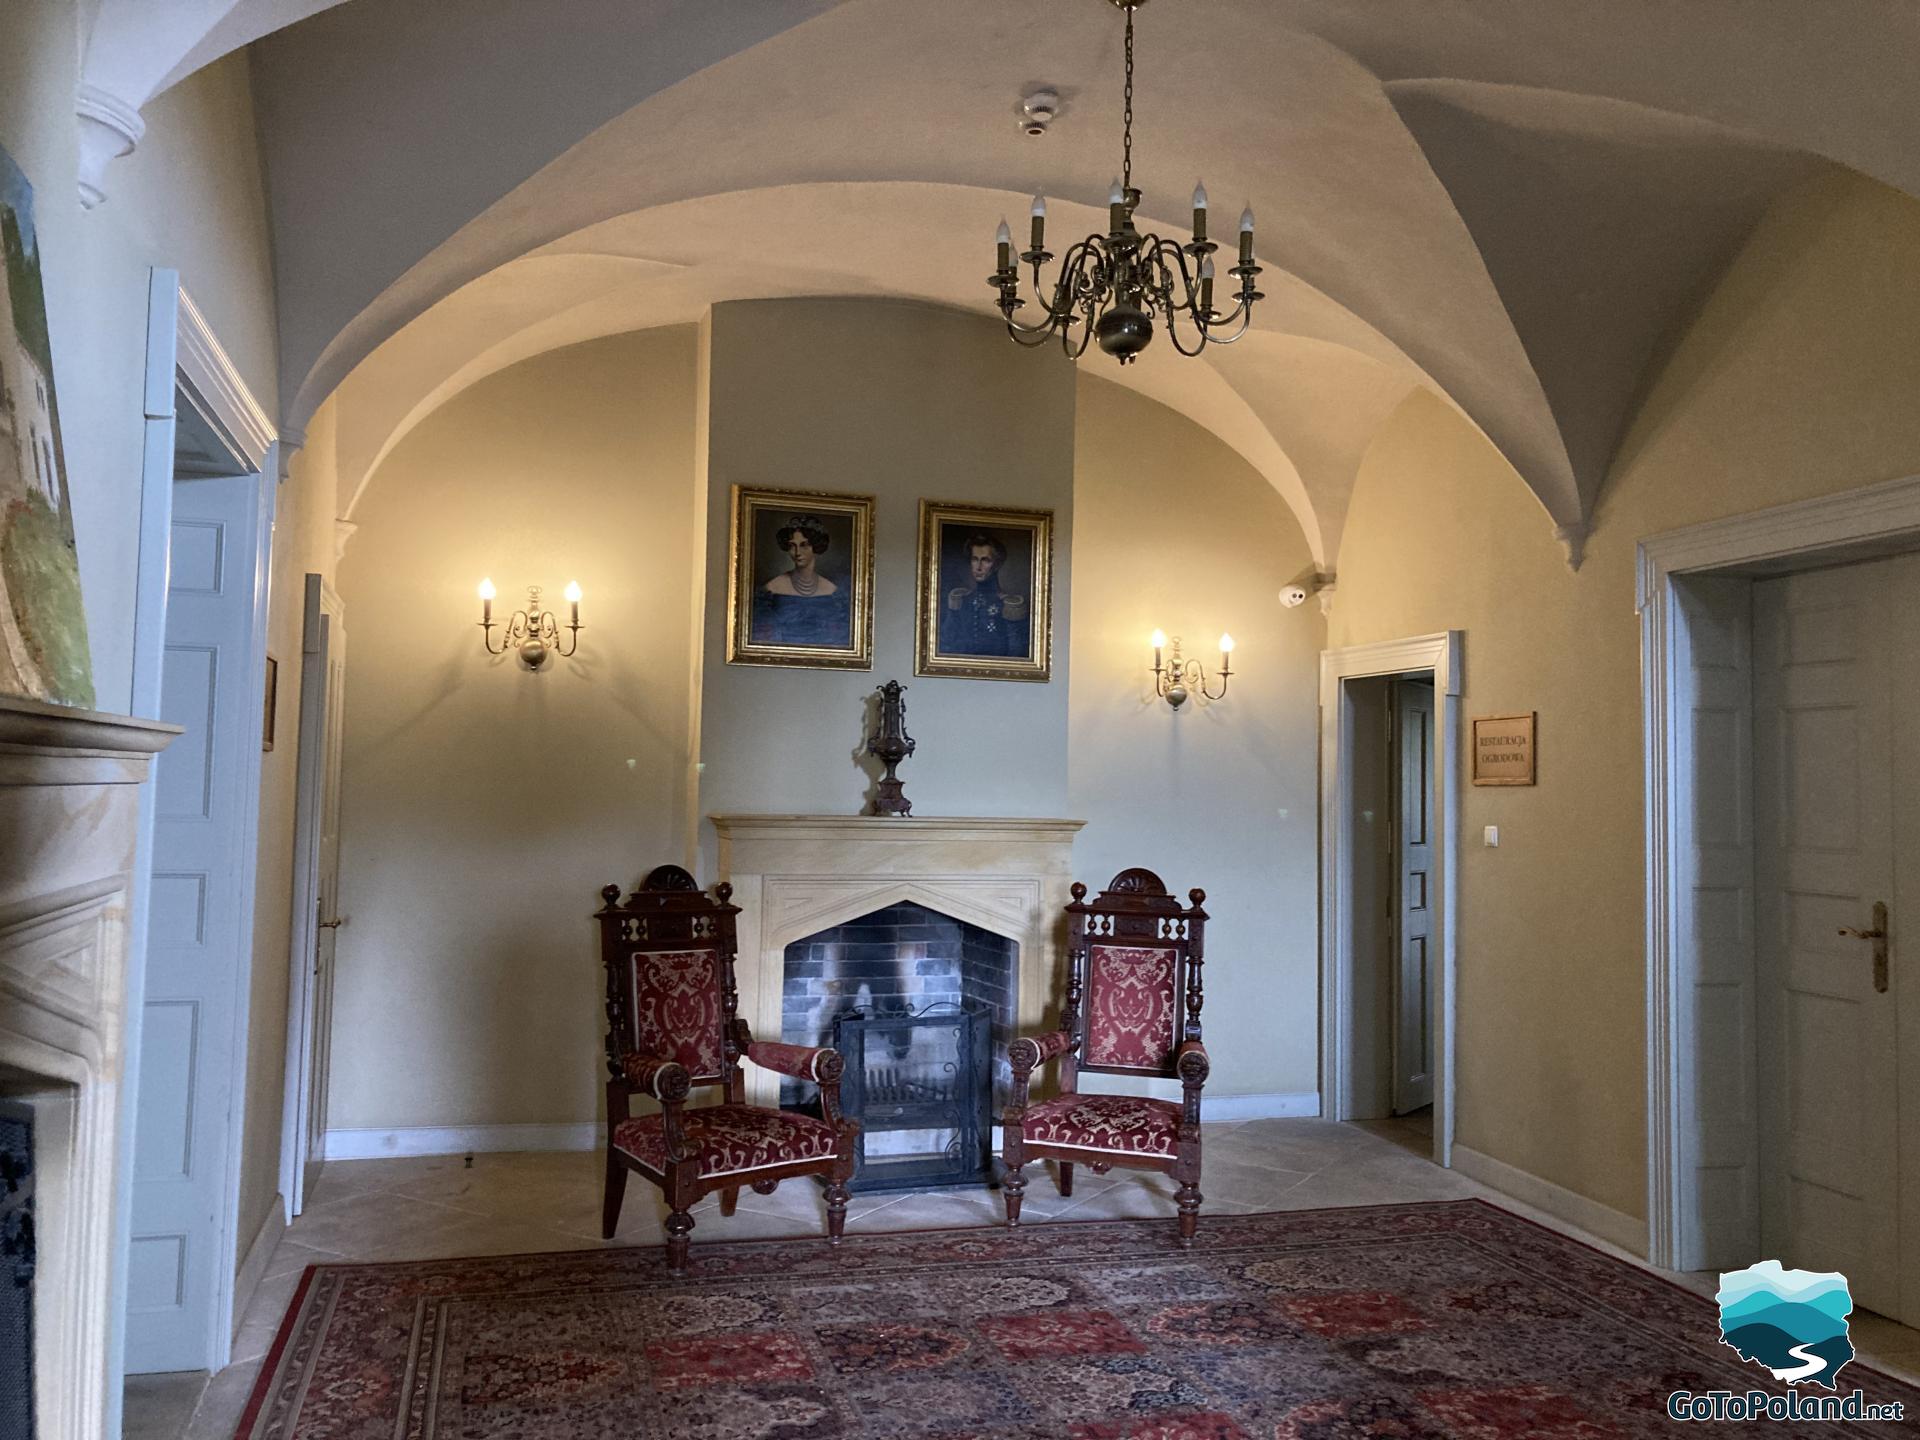 A room inside the palace, there are two armchairs by the fireplace. Two portraits hang above the fireplace on the wall